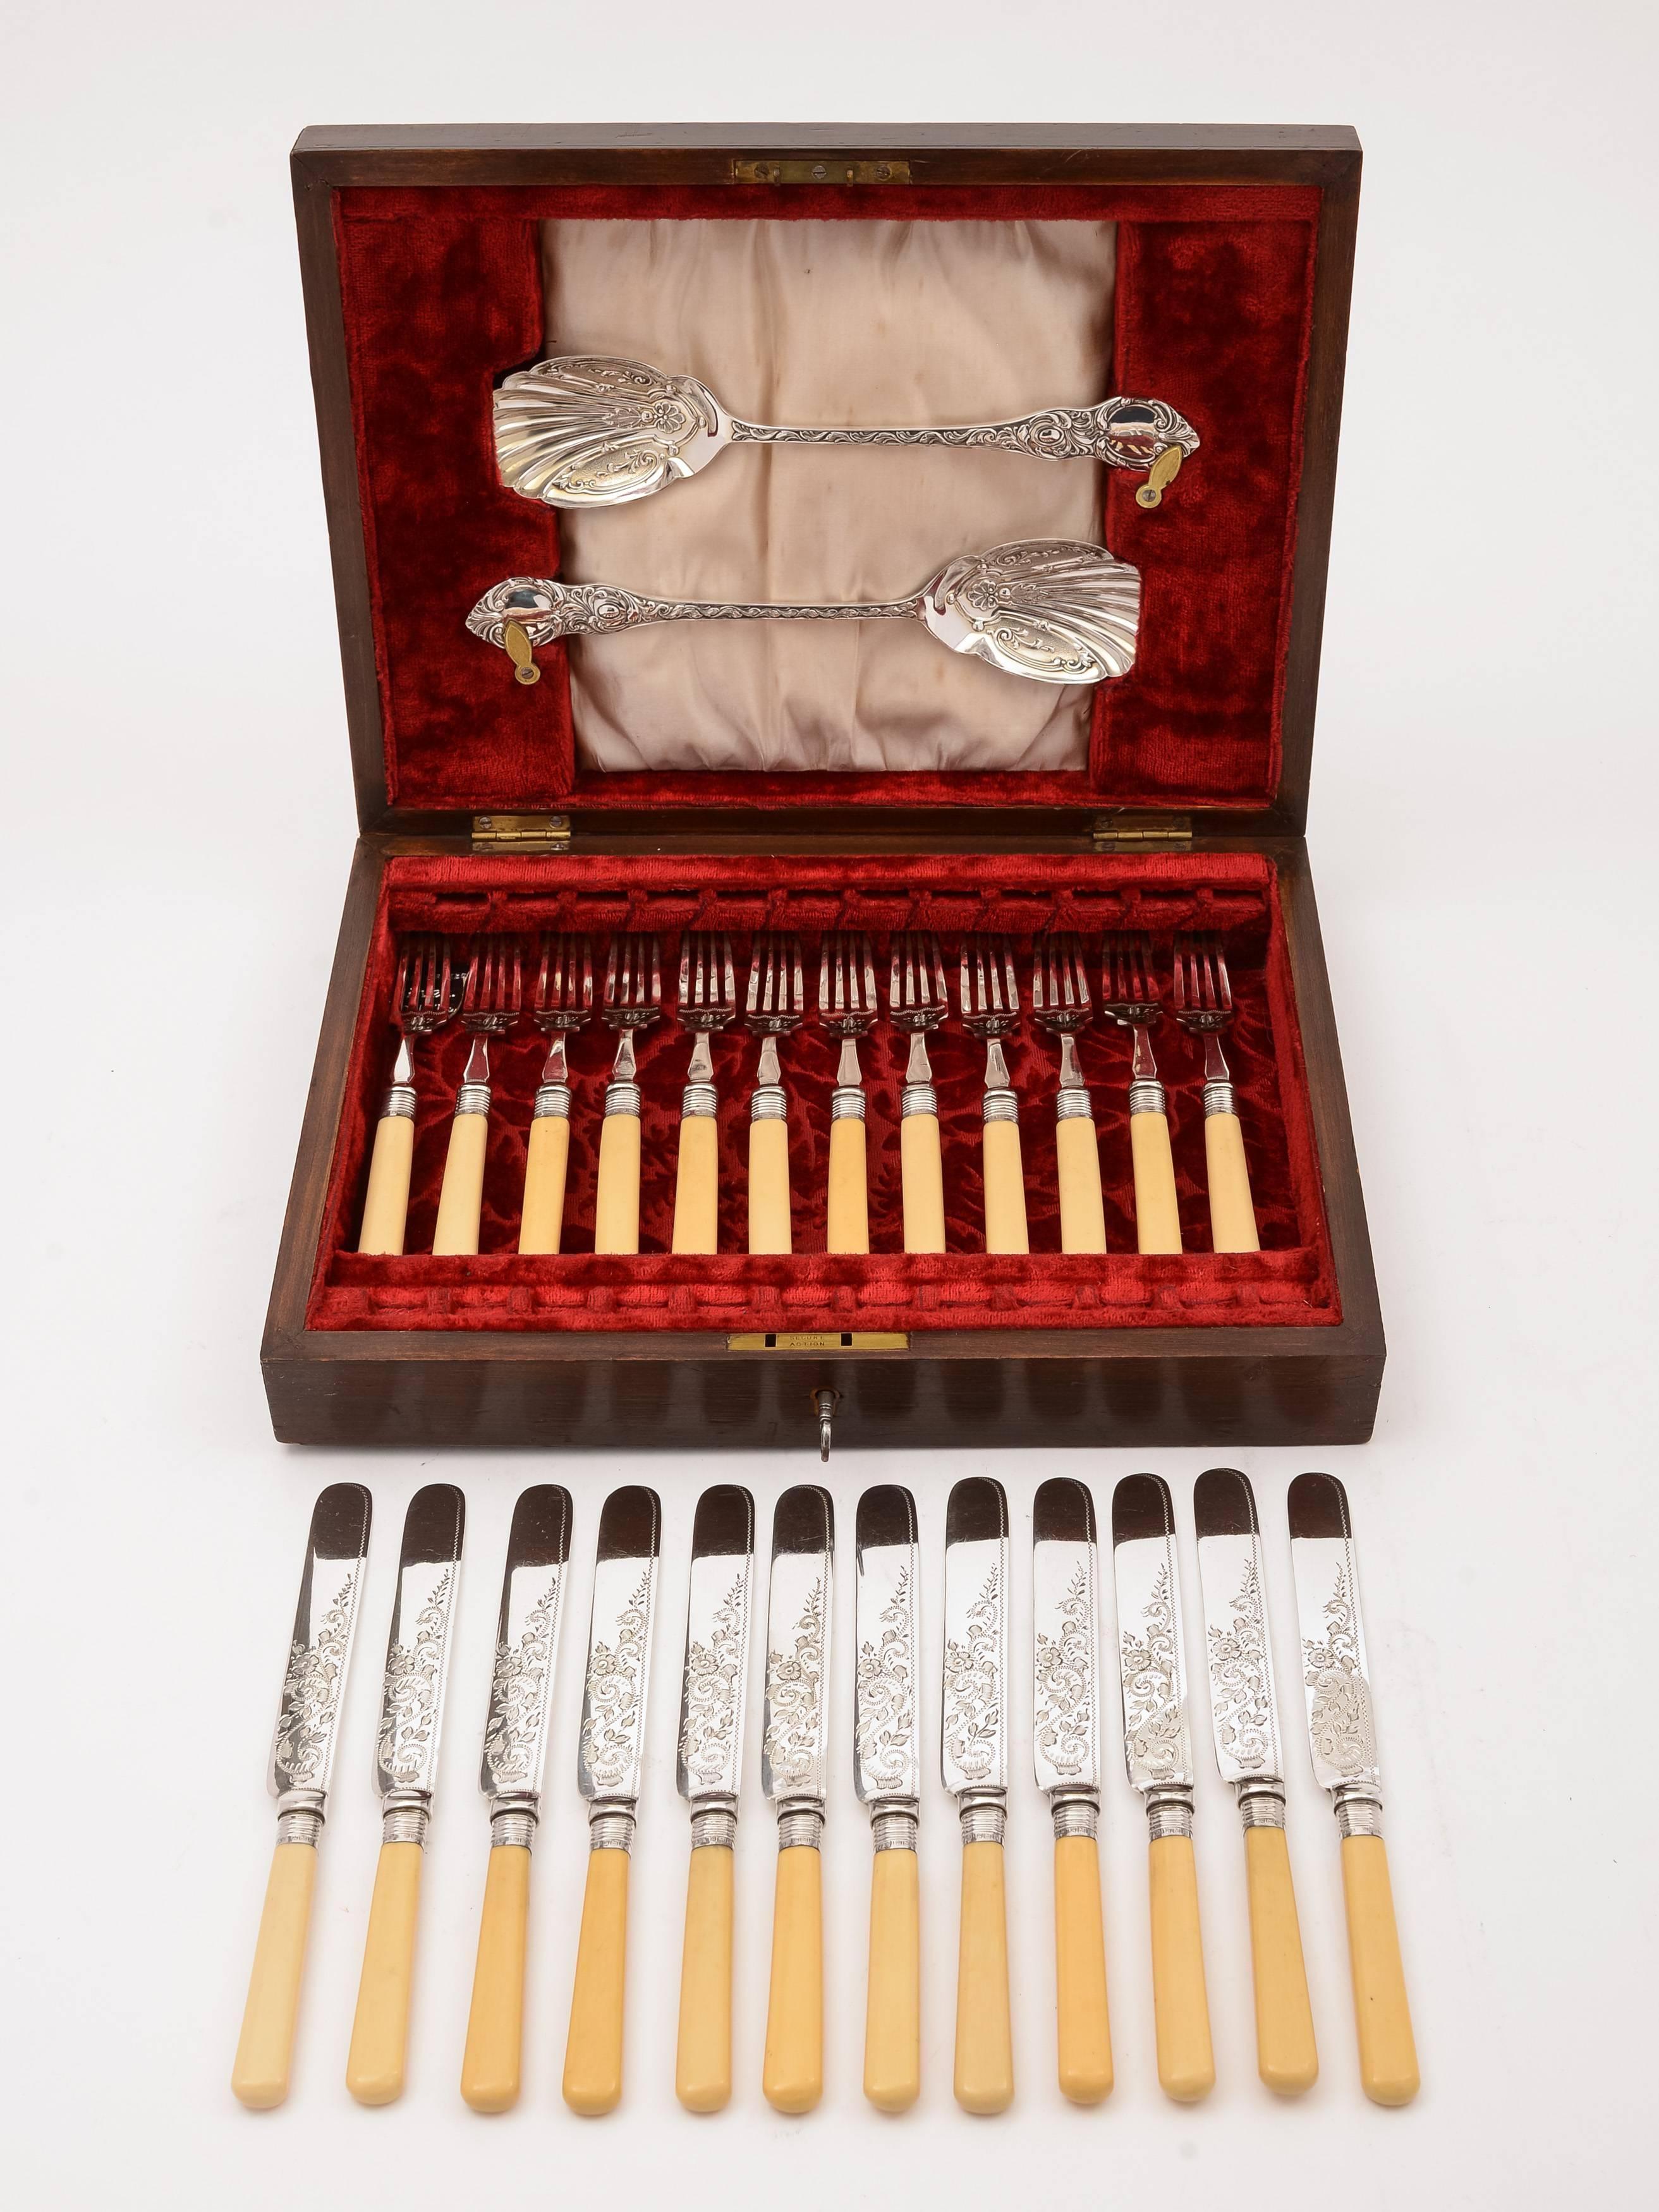 A wonderful English Edwardian cased silver plated 12 + 12 dessert set with two silver plated fruit serving spoons. The knives have lovely engraved foliate decoration with hard plastic handles and silver ferules which are hallmarked Sheffield 1904.